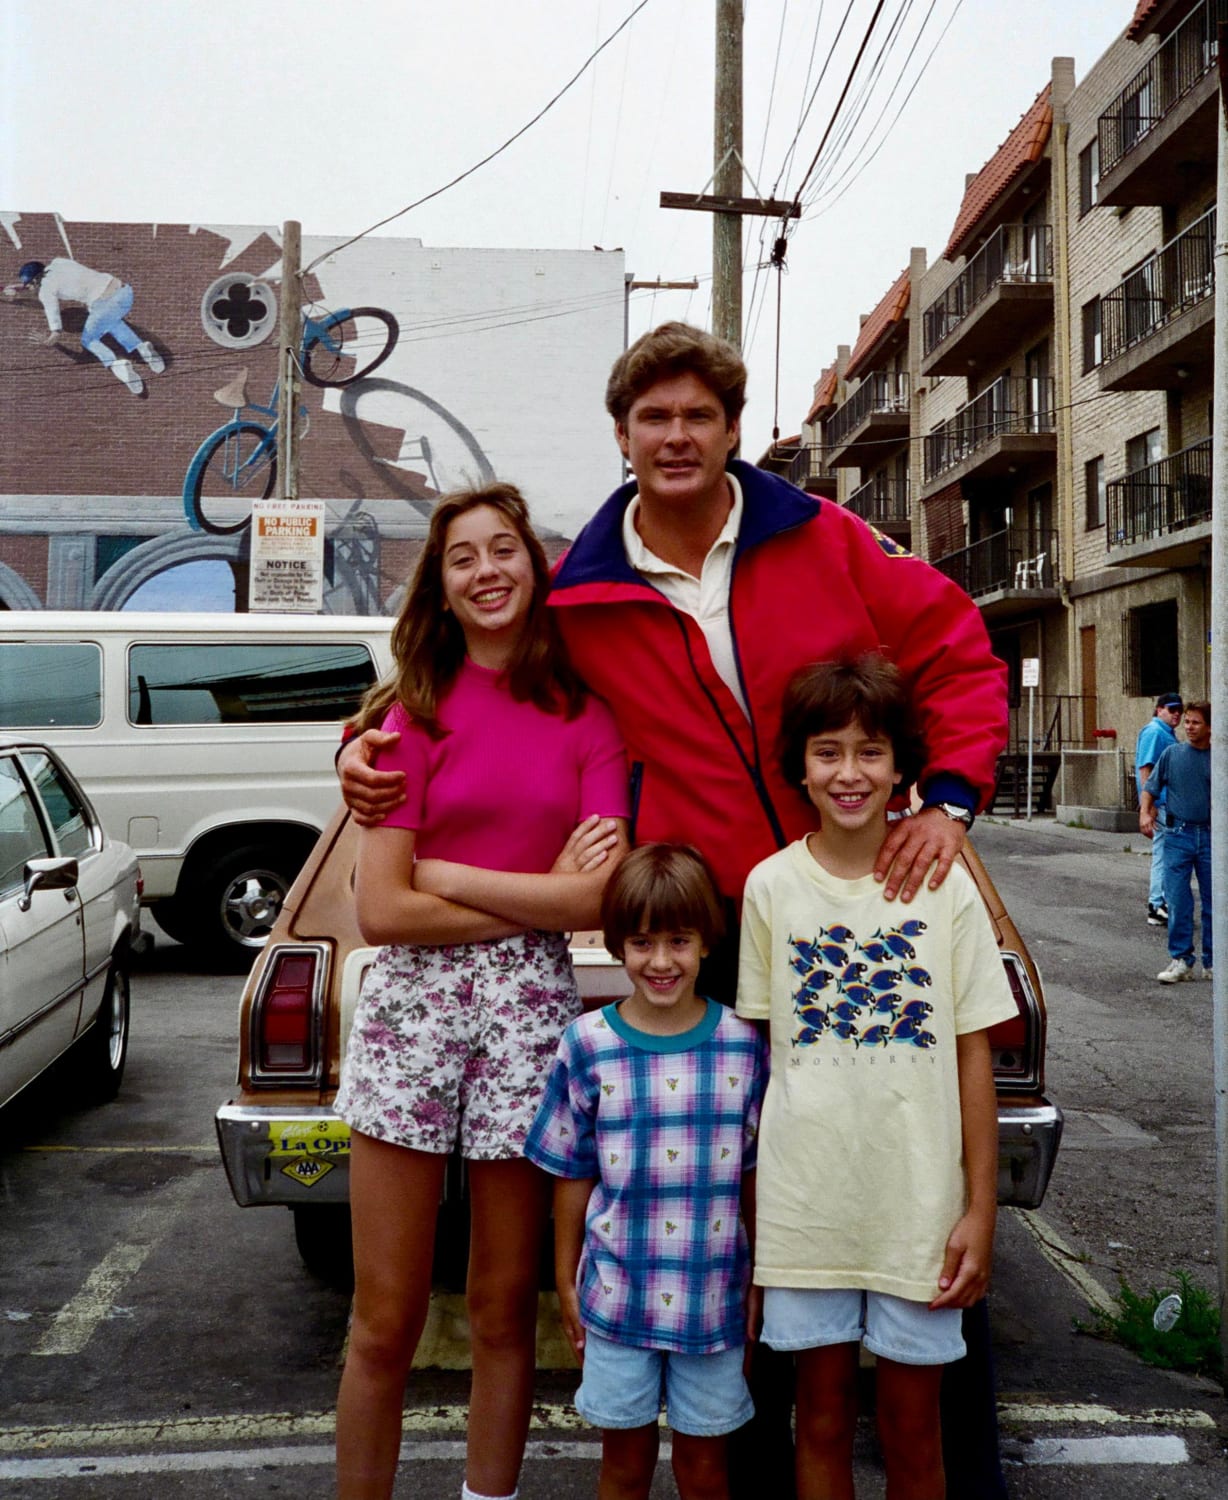 Me (left) and my sisters, hassling the Hoff in 1995 near Venice Beach. Our mom made us take a photo with him. Lol.